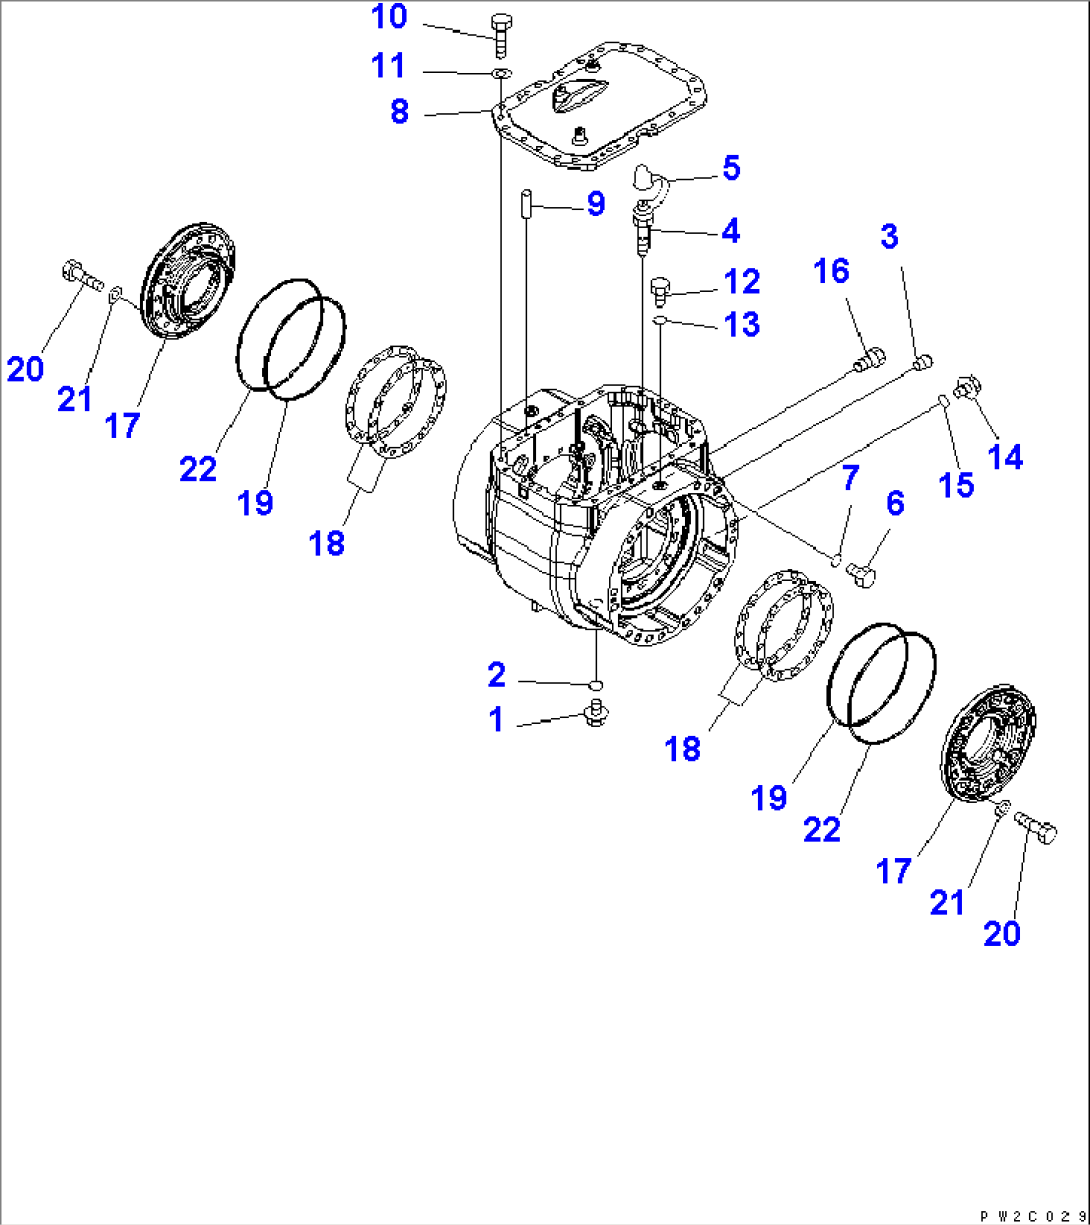 FRONT AXLE (AXLE HOUSING ACCESSORY)